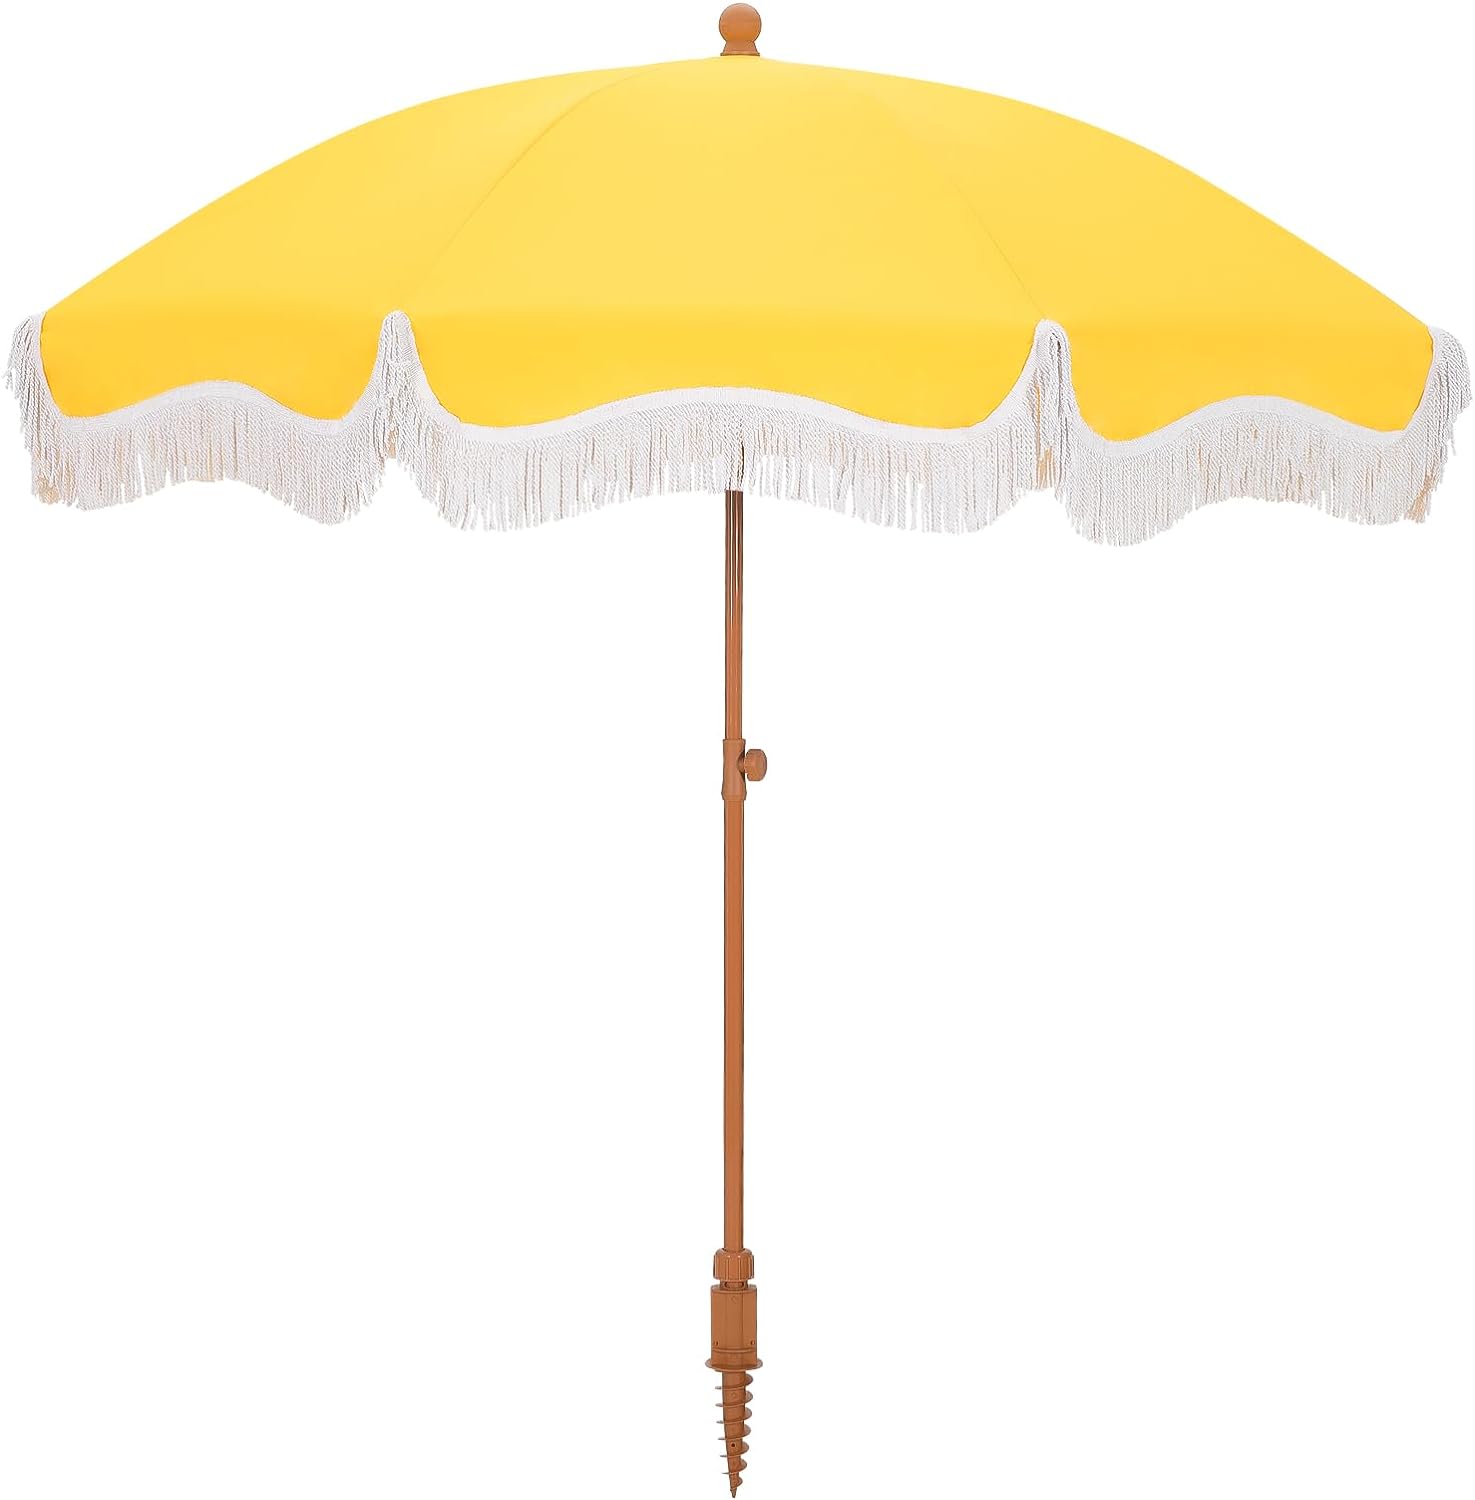 MFSTUDIO 7ft Beach Umbrella with Fringe, Tassel Umbrellas UPF50+ with Tilt Button & Crank, Holiday Outdoor Umbrella with Carry Bag, Ideal for Garden Lawn Poolside